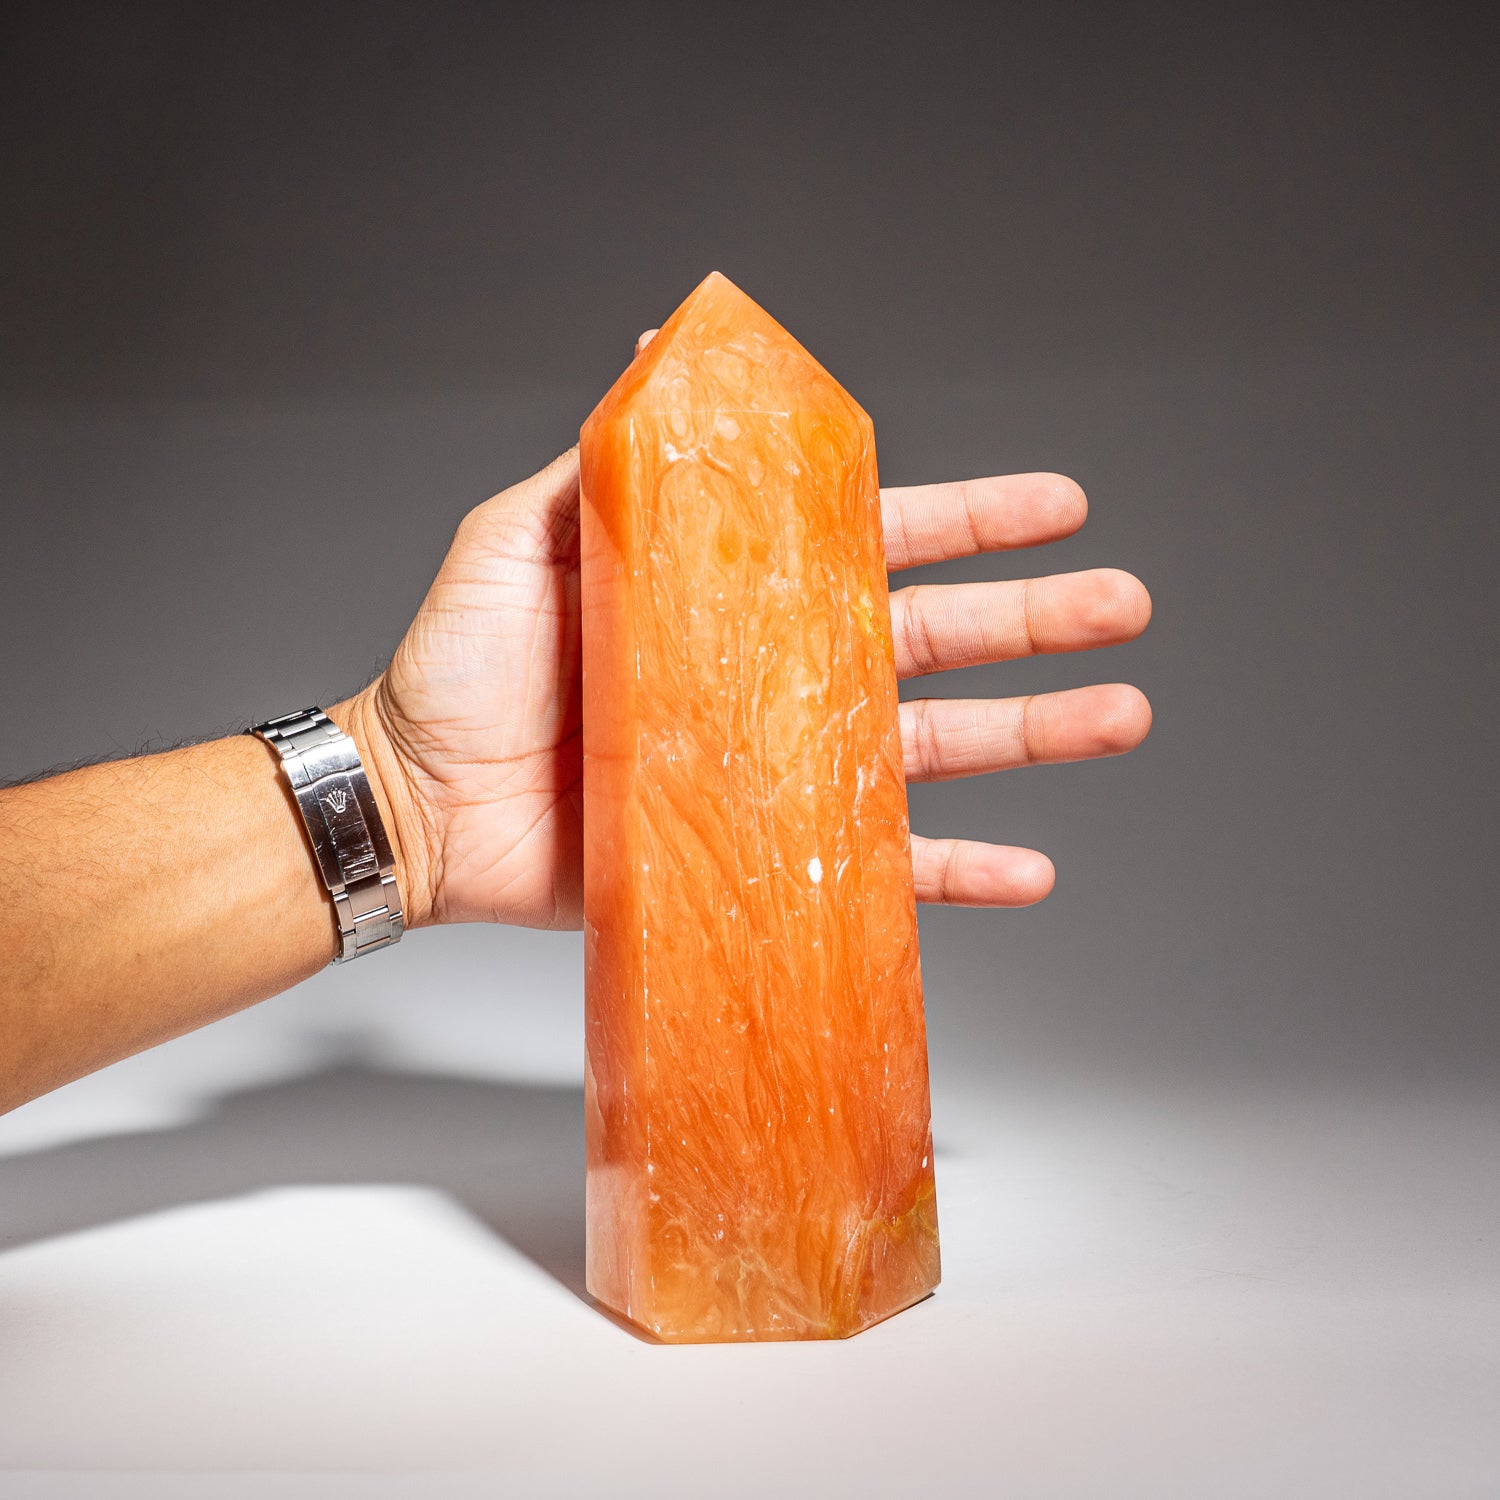 Genuine Polished Orange Selenite Point from Morocco (4 lbs)